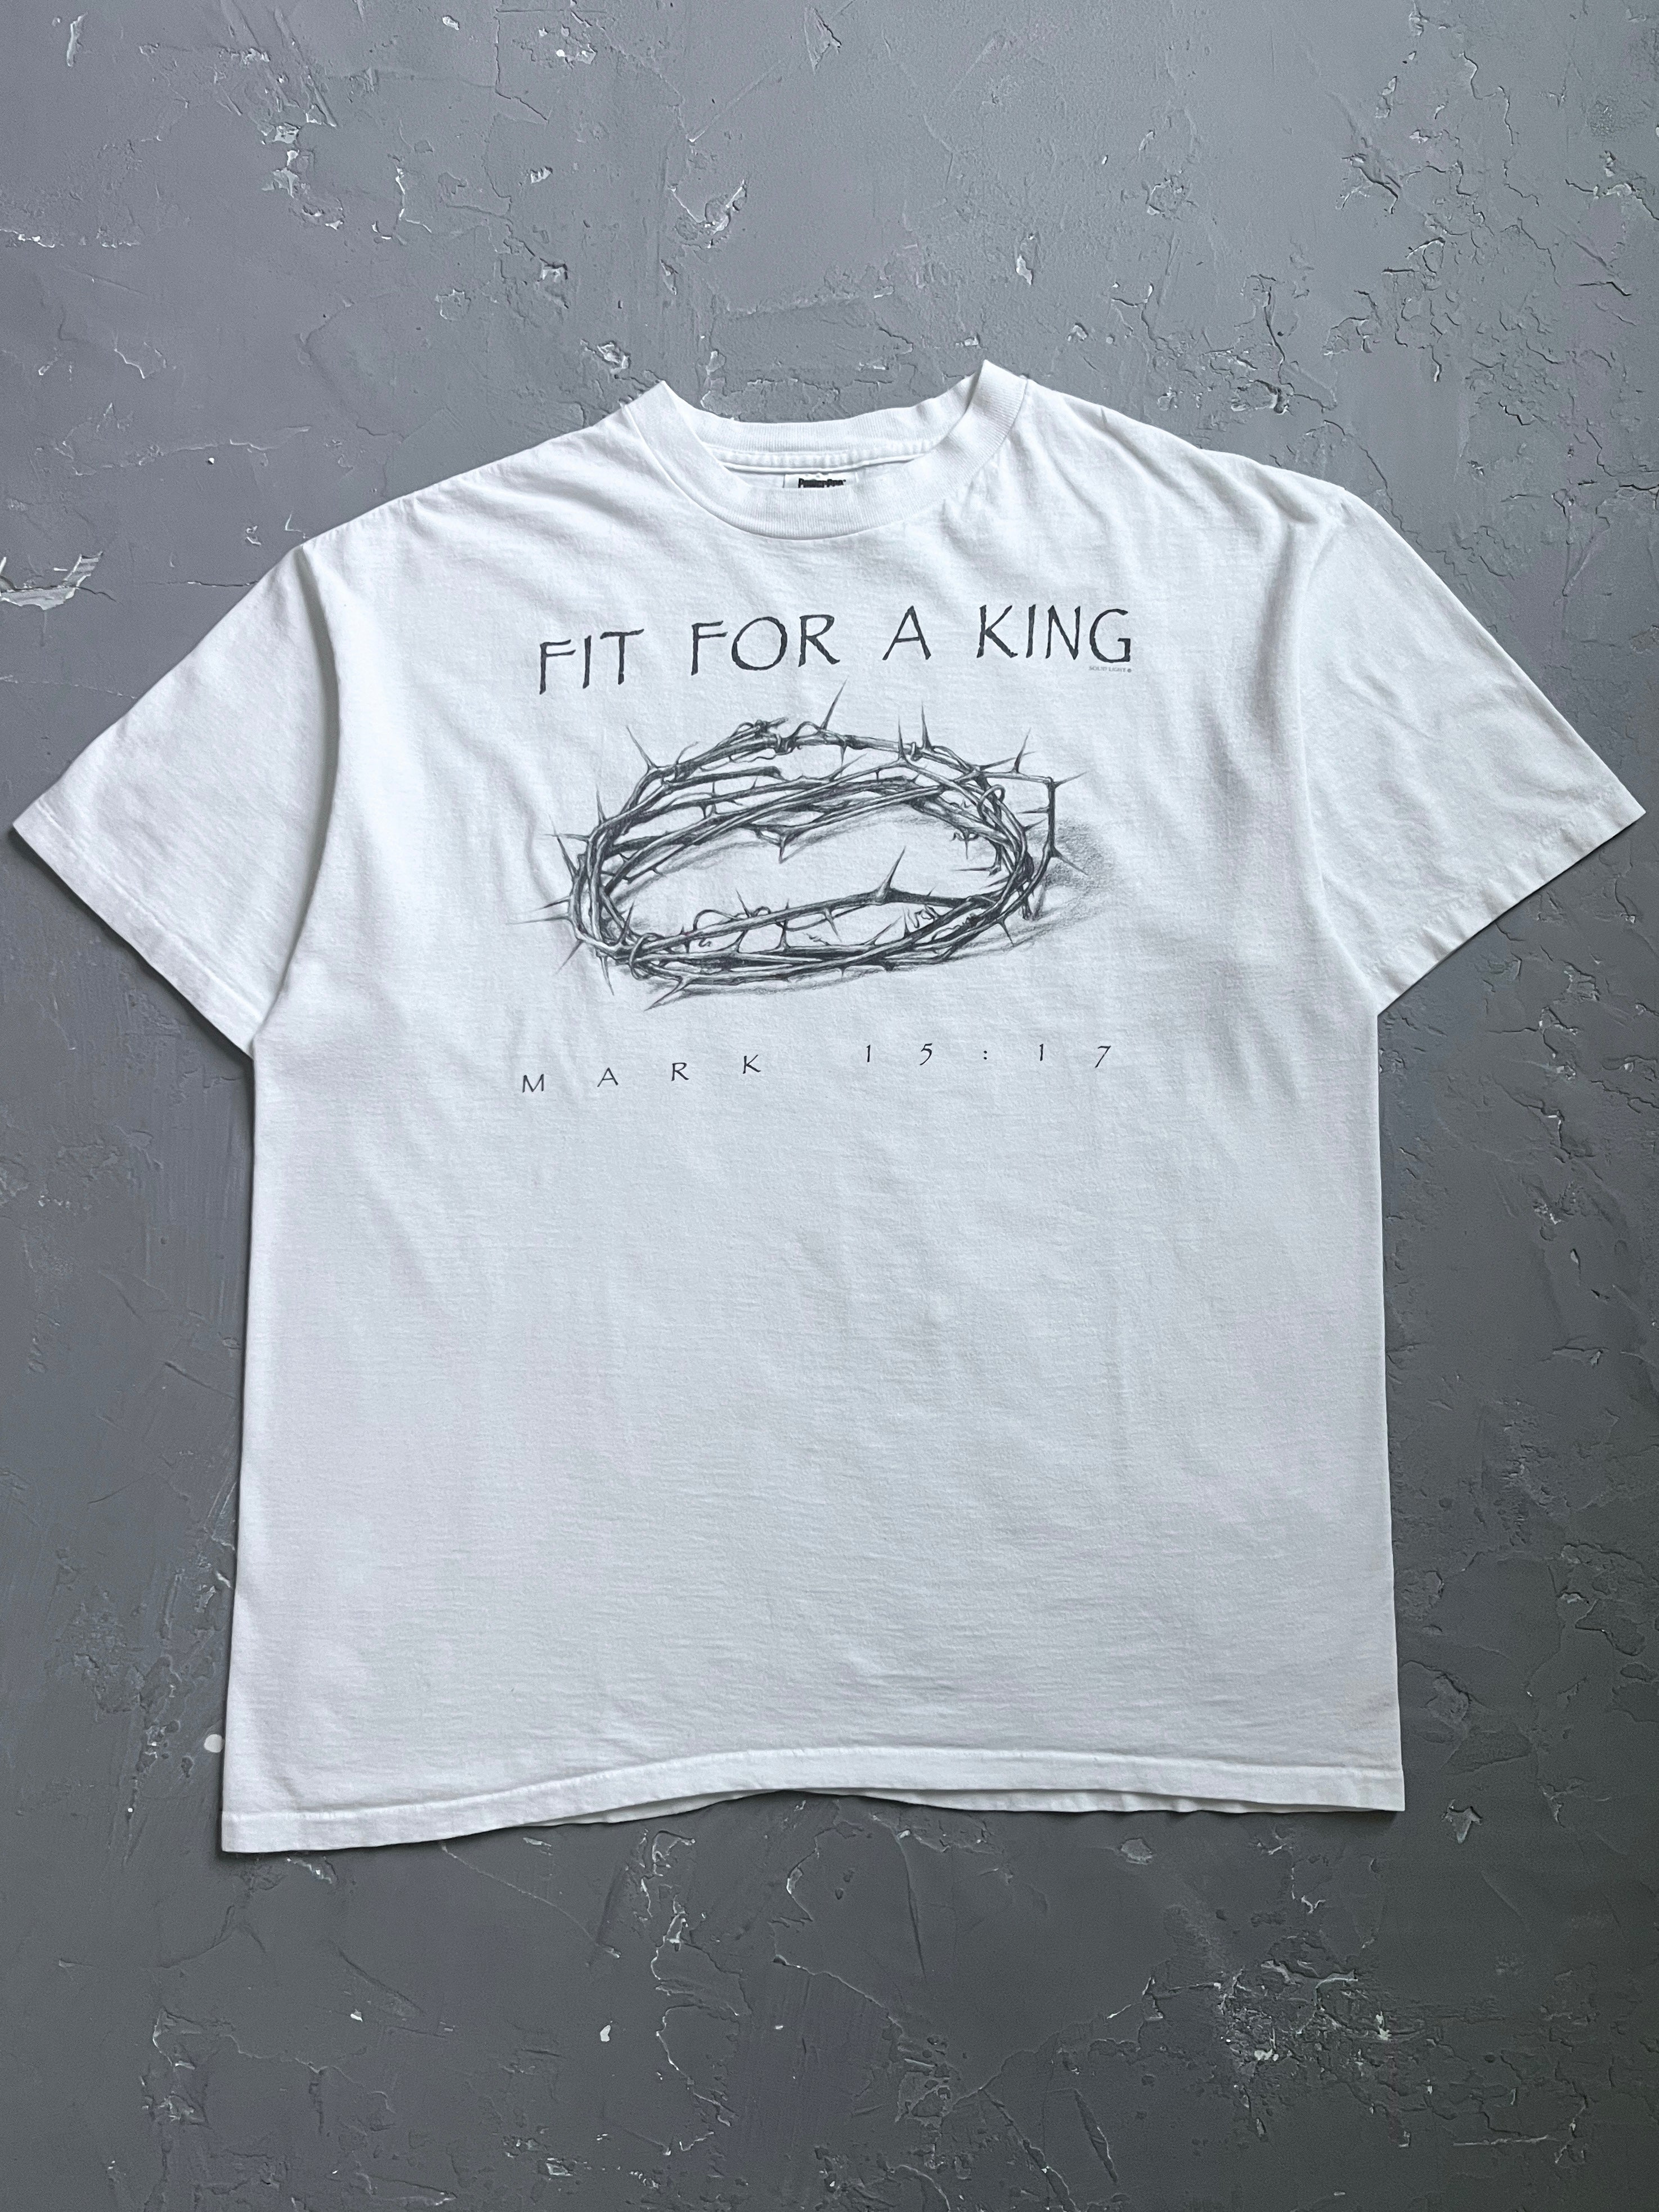 1990s “Fit For A King” Jesus Tee [XL]